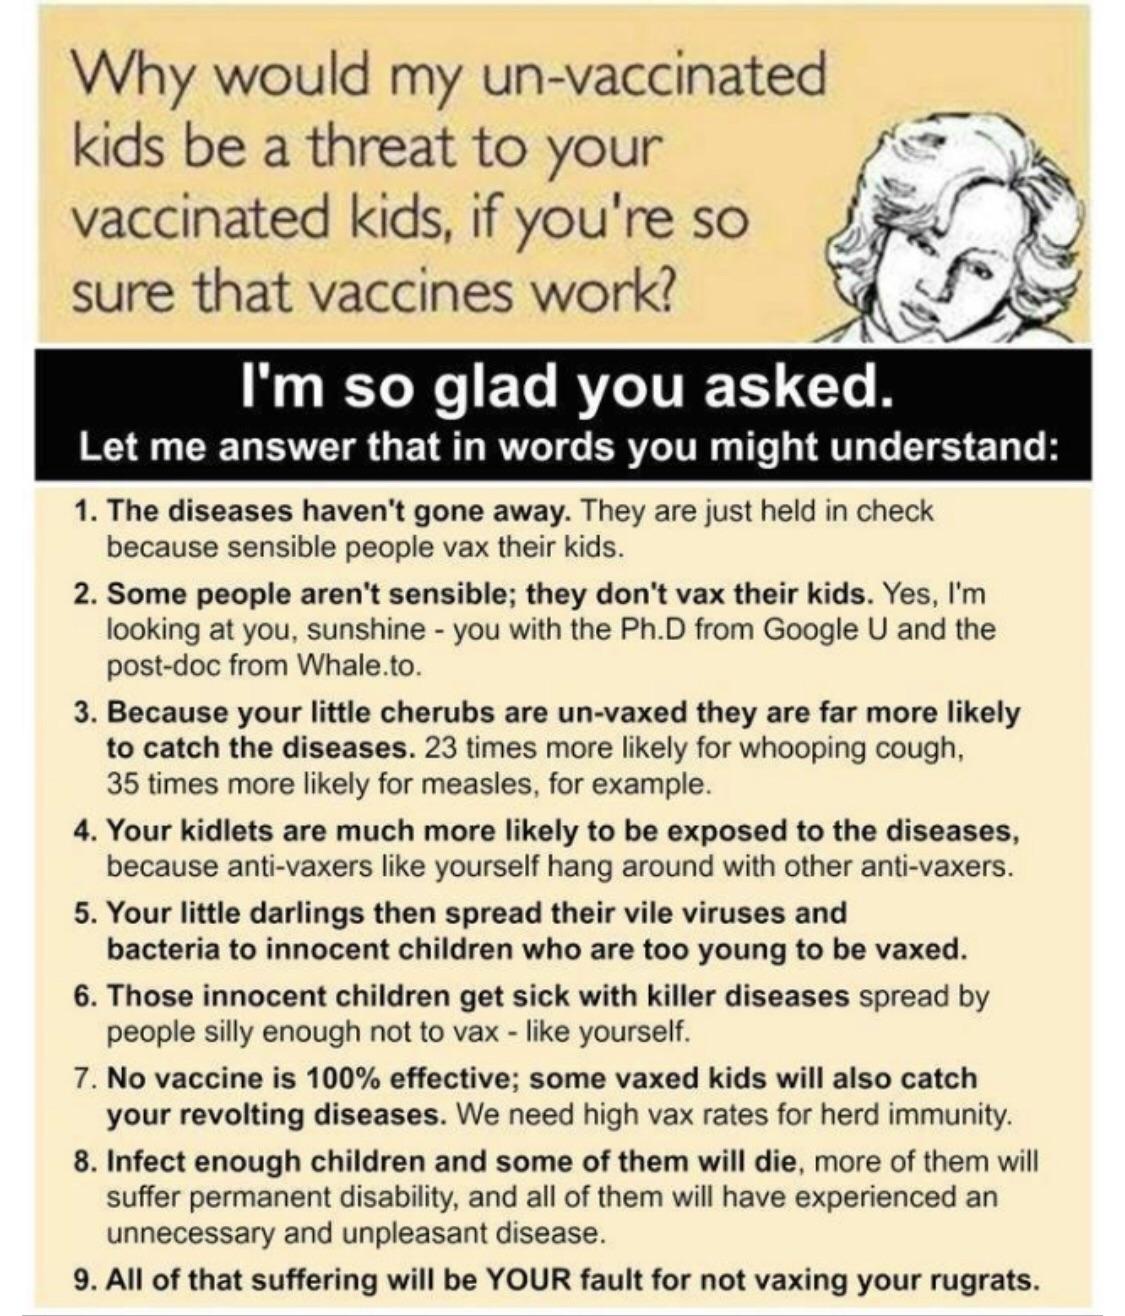 Why would my unvaccinated kids be a threat, if youâre so ...